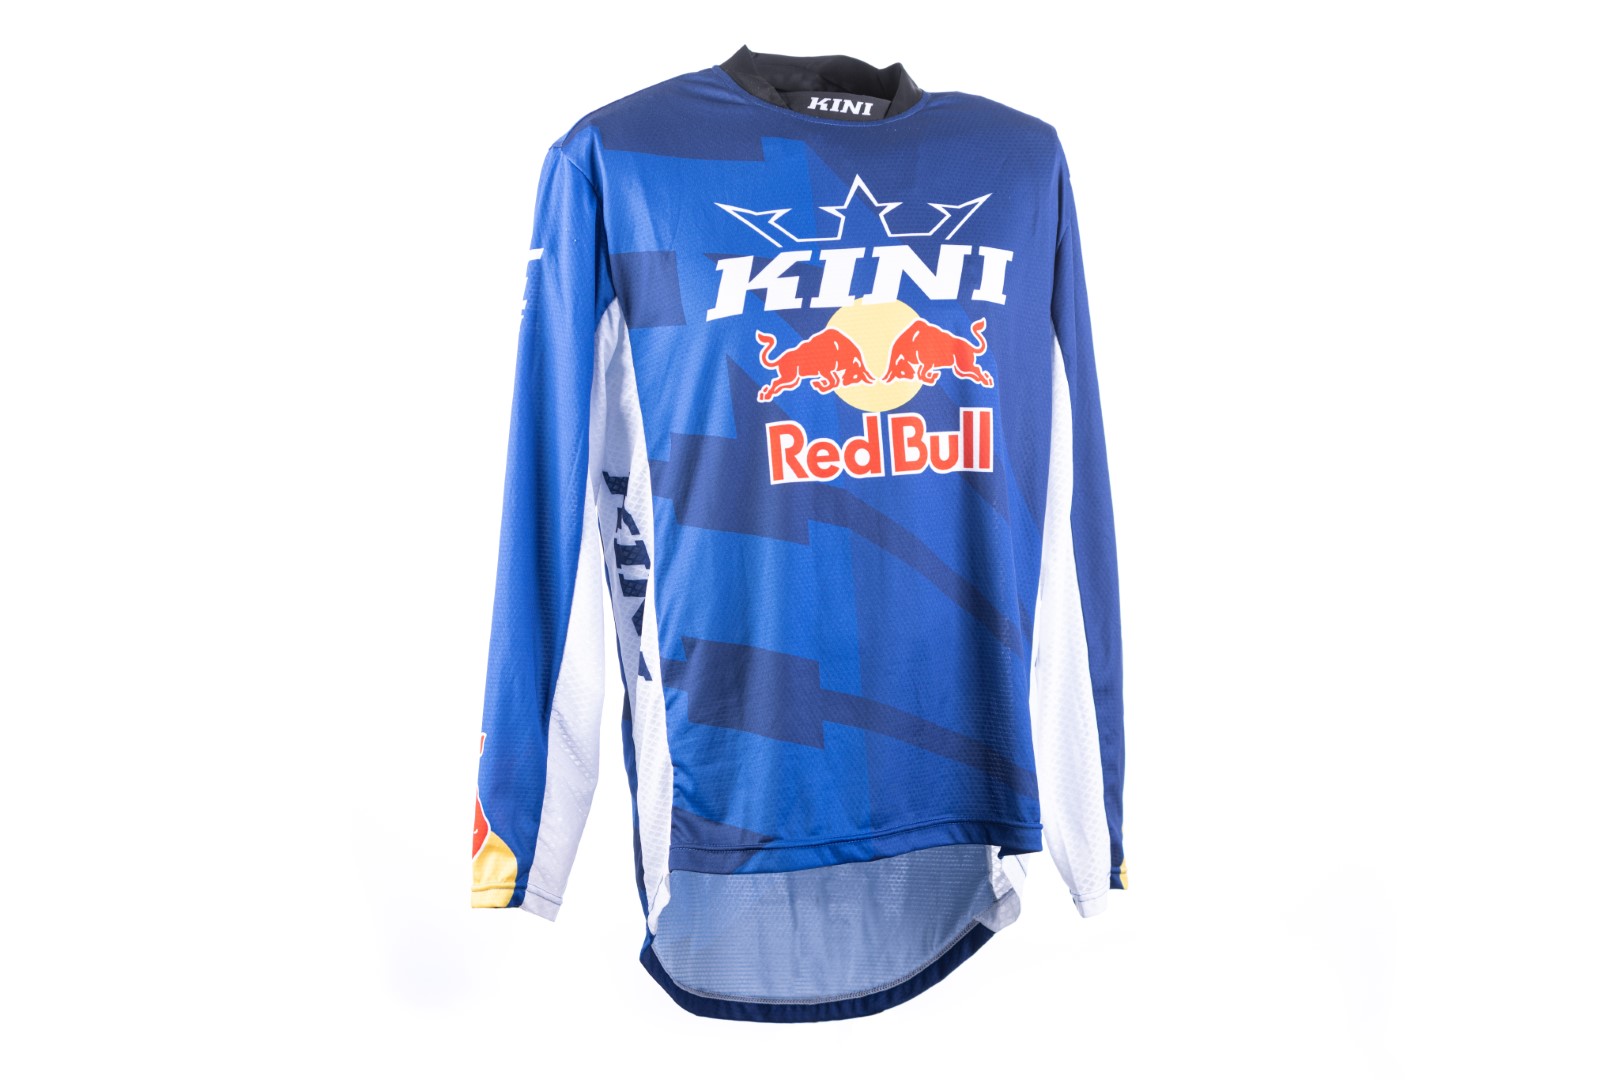 KINI Red Bull Competition Shirt Navy White